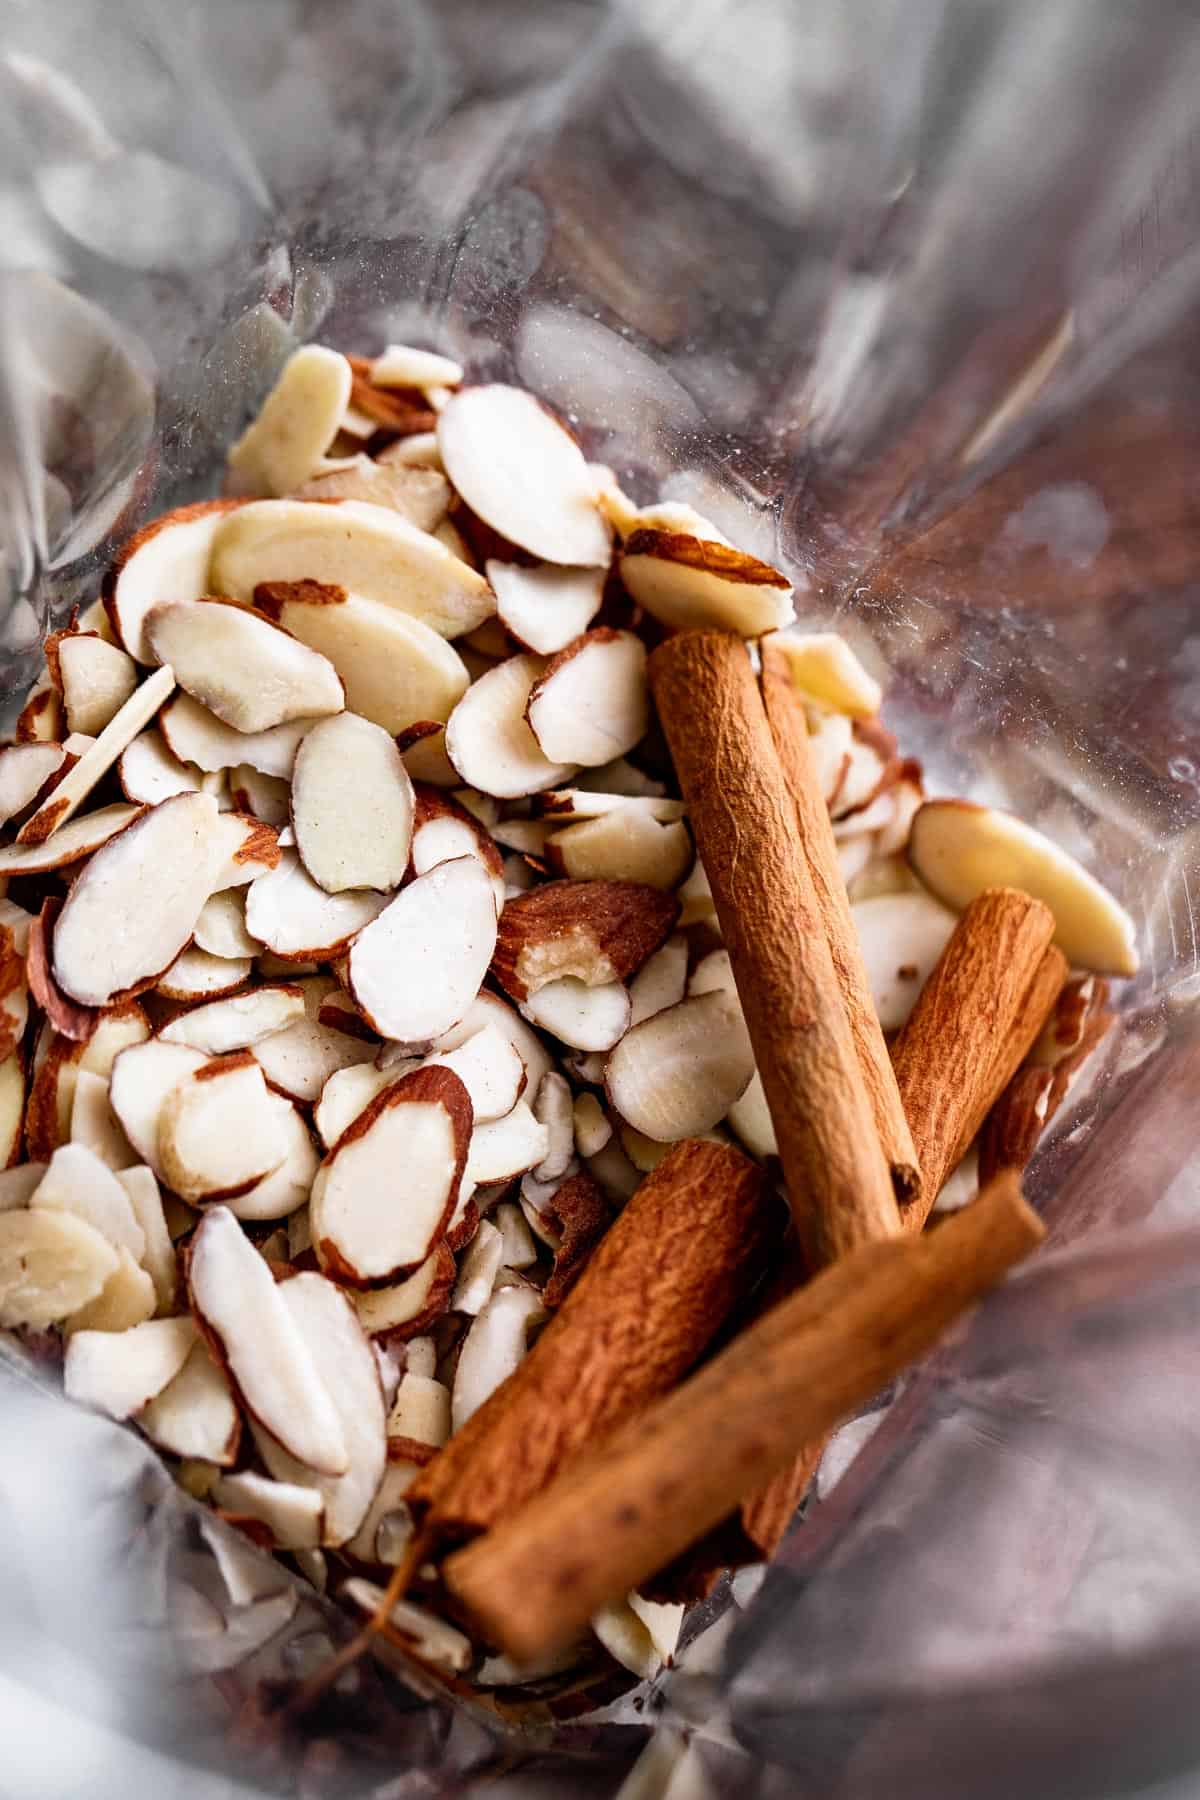 Overhead image of sliced almonds and cinnamon sticks in a blender.